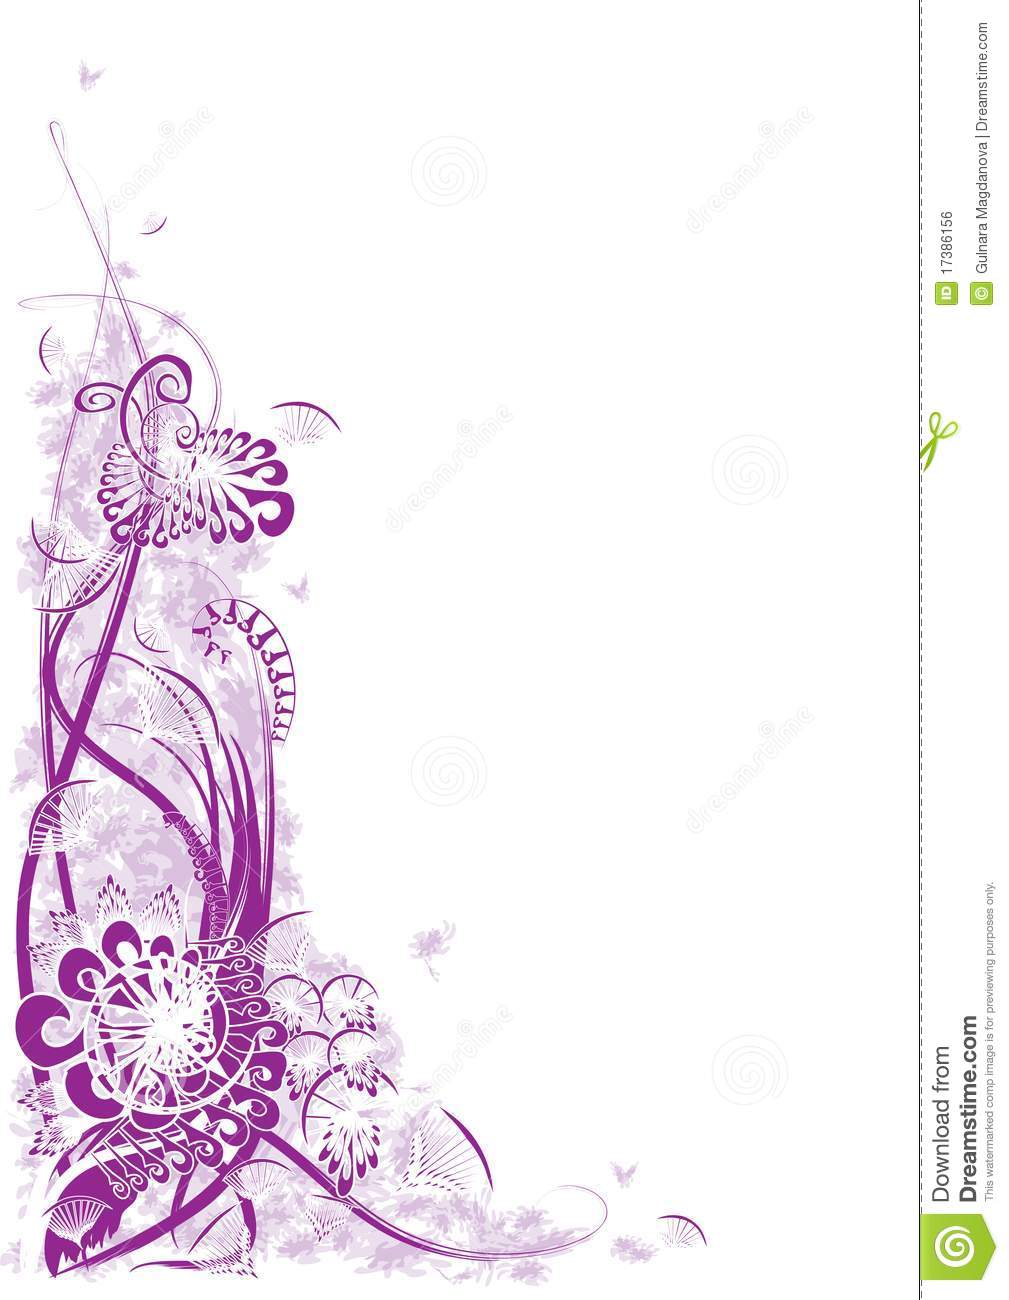 19 Abstract Purple Vector Corner Images